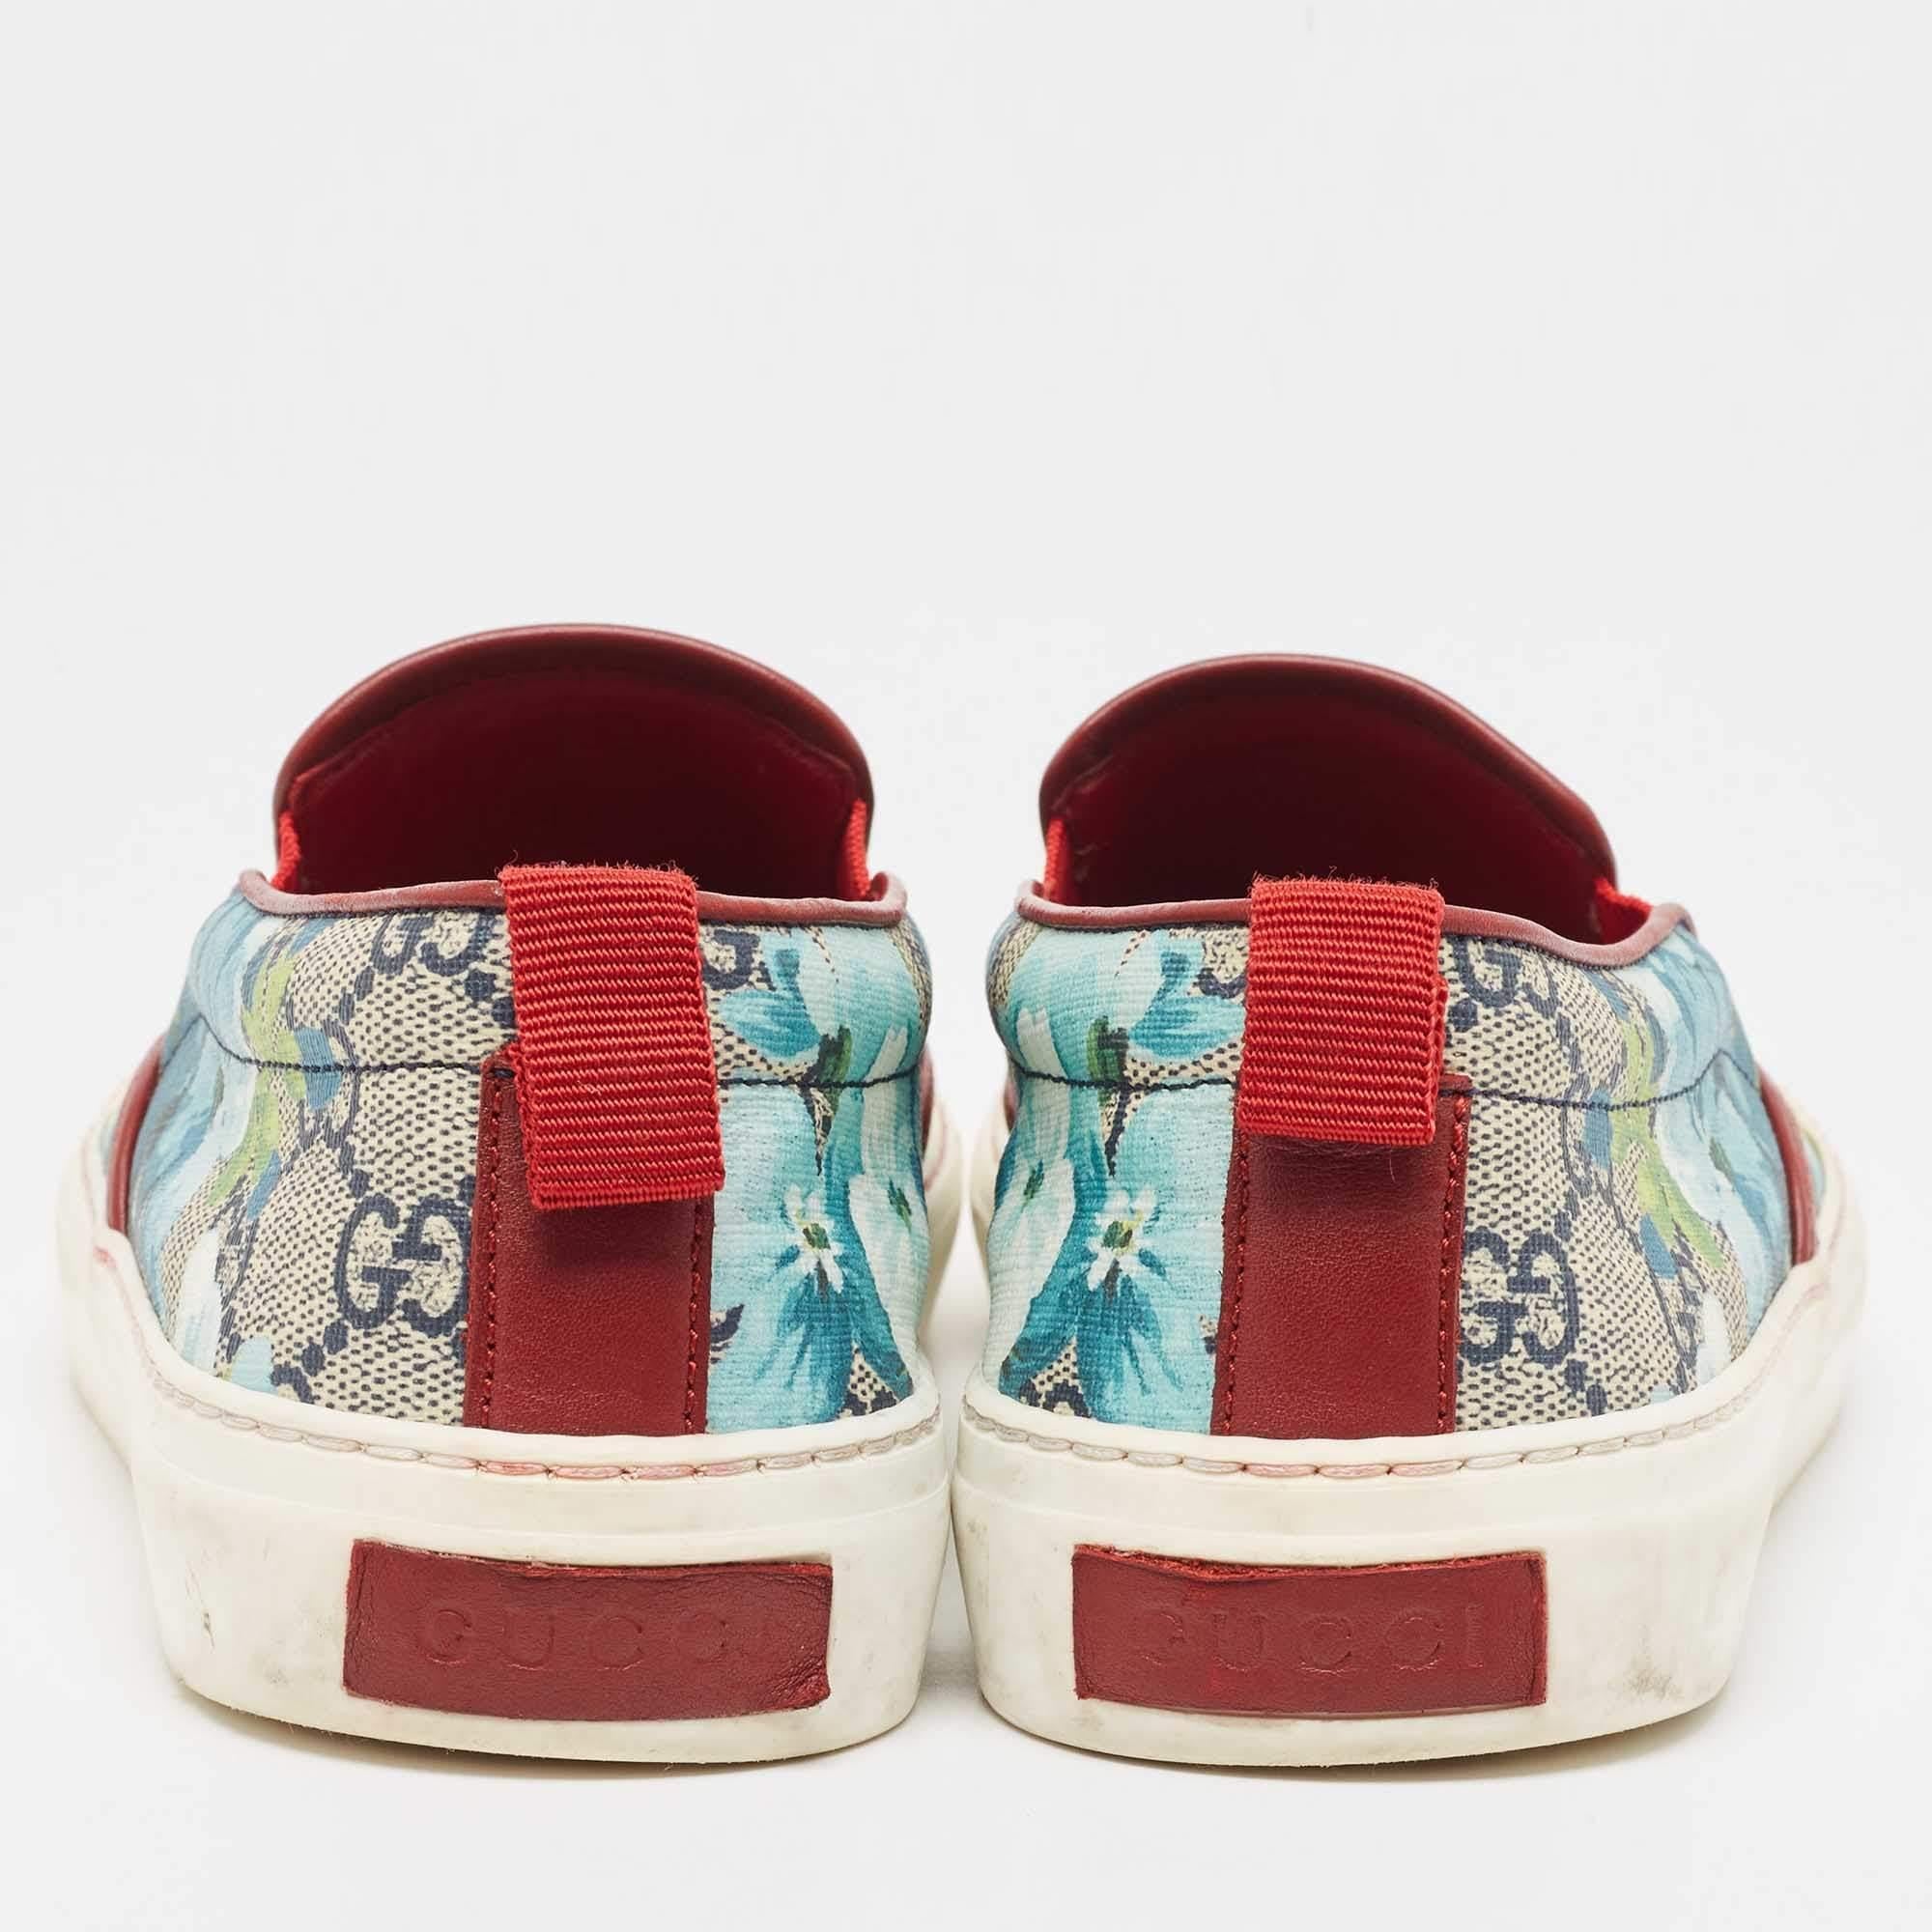 These sneakers from Gucci are truly a maker of trends. The sneakers are designed in a low-top profile using GG Supreme canvas and decorated with Bloom prints. Set on rubber soles, this pair is high in comfort and style, just perfect to be worn by